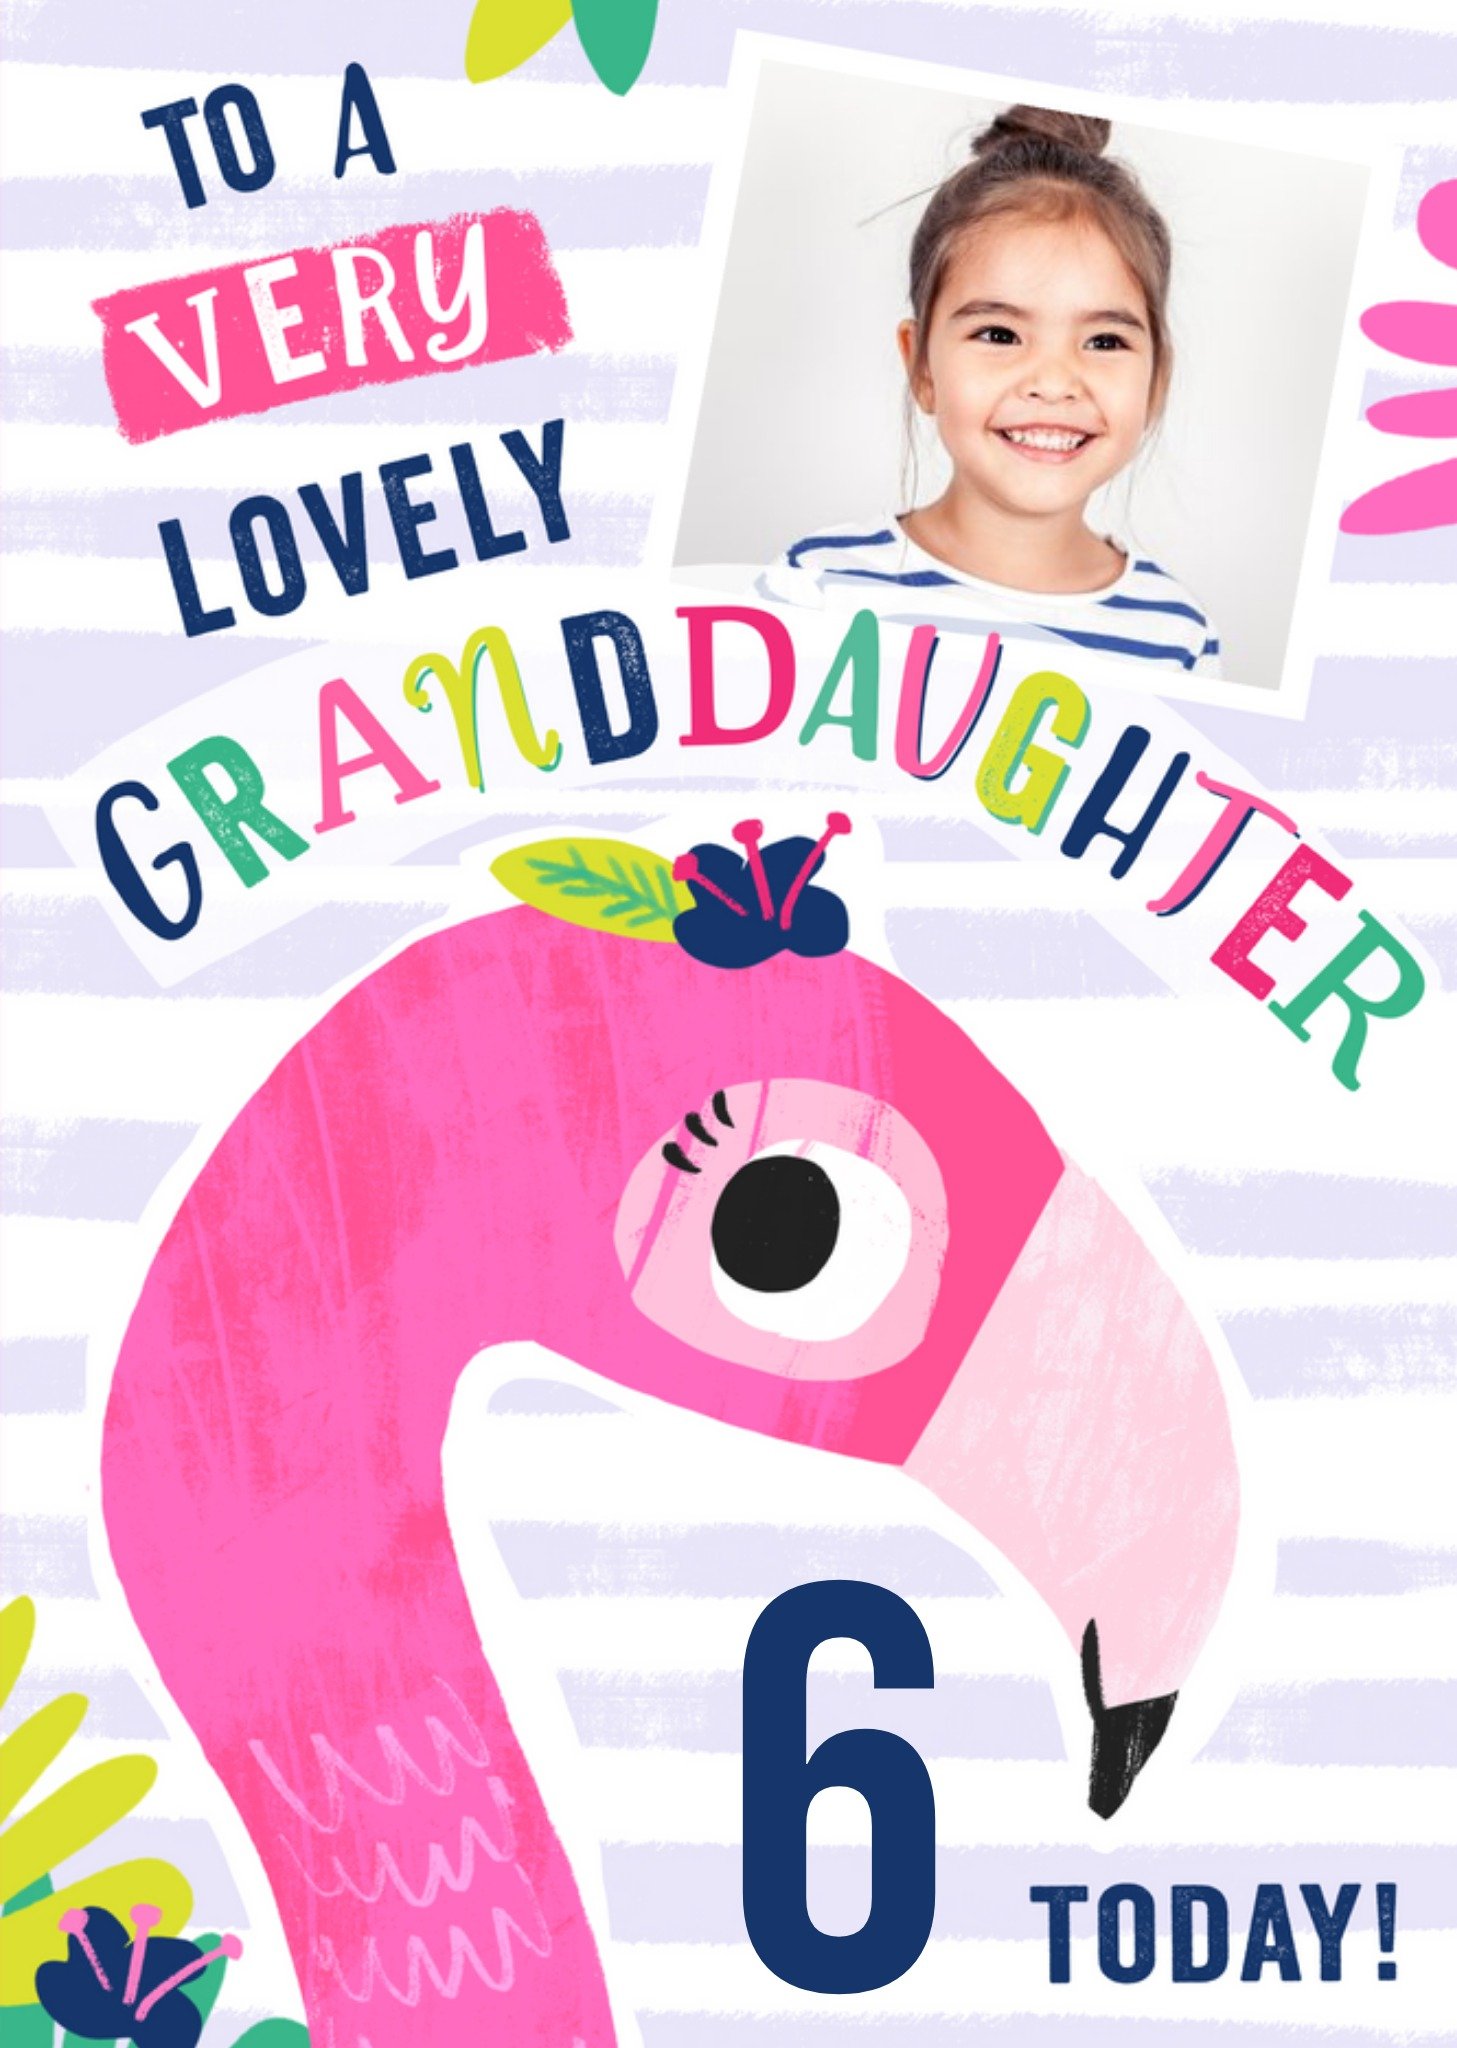 Moonpig 6 Today Flamingo Photo Upload Birthday Card For Granddaughter, Large